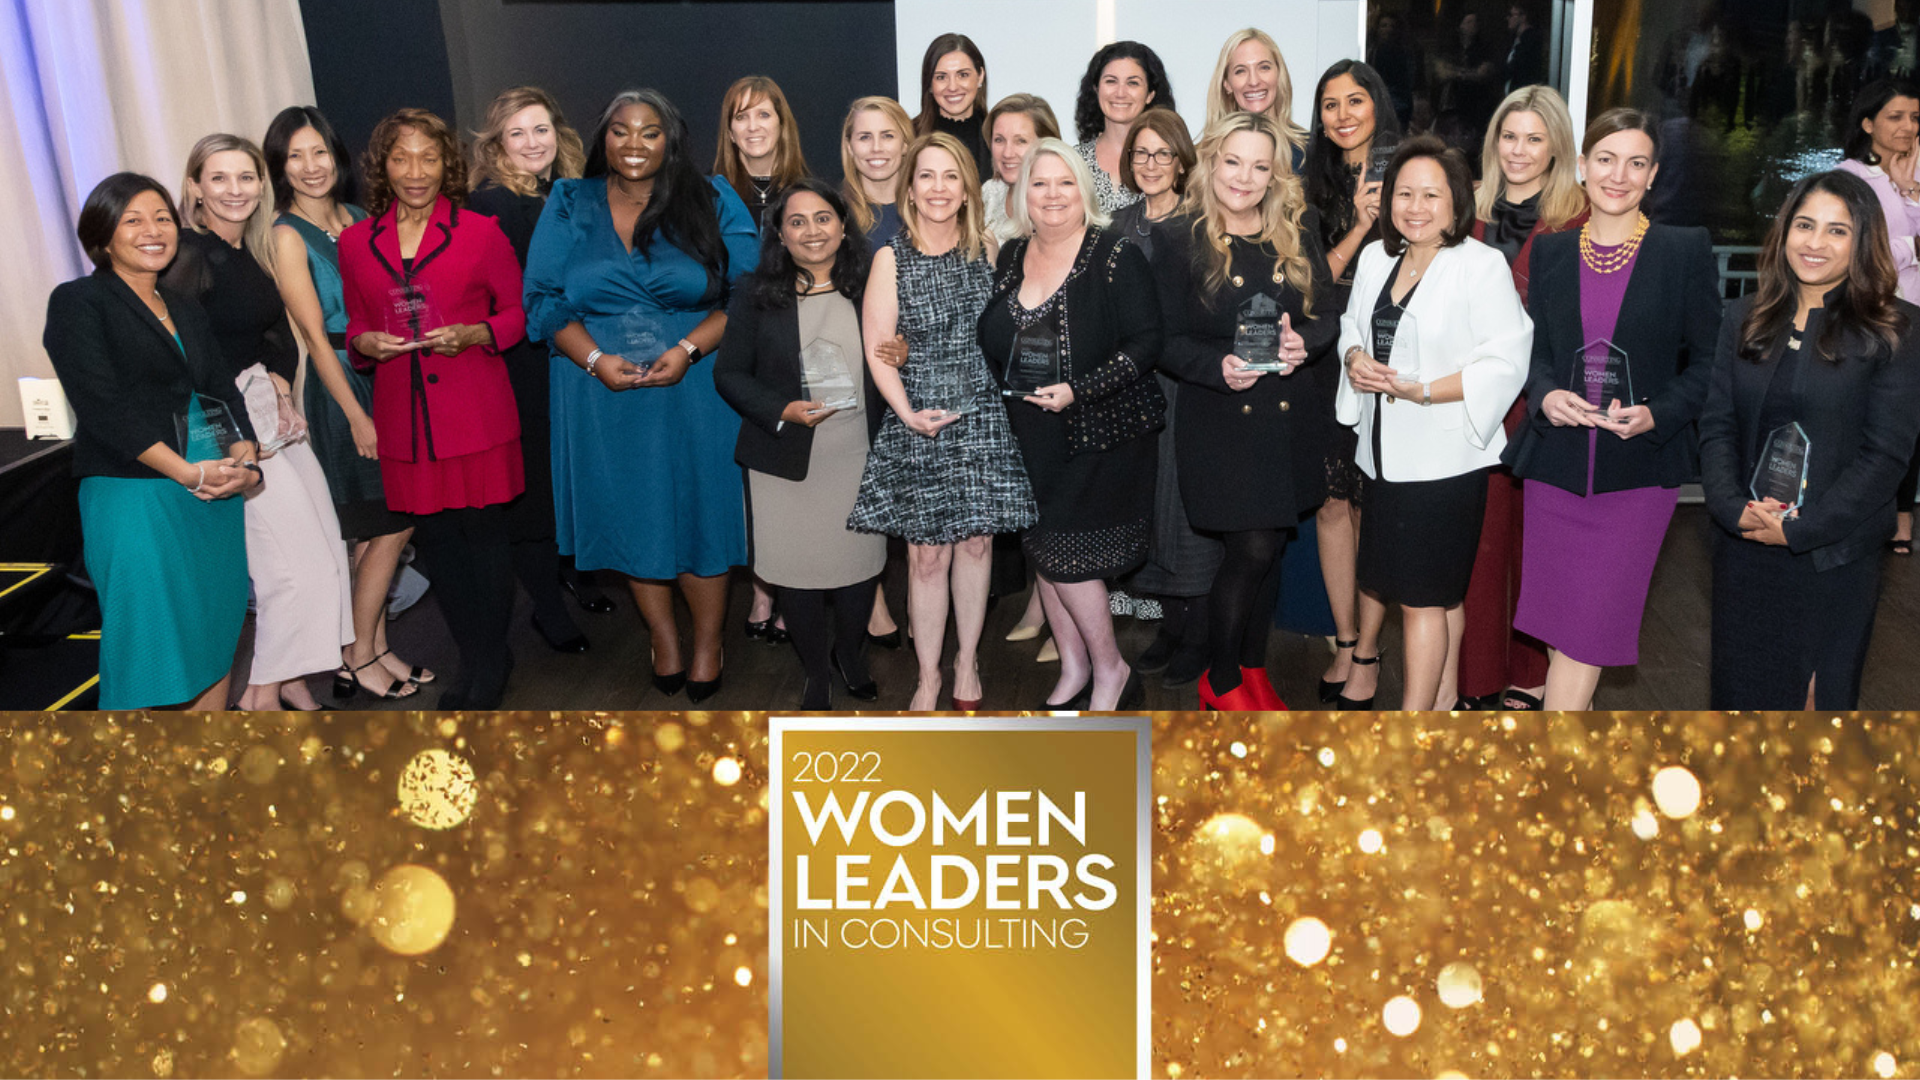 Awards Gala and Photos! The 2022 Women Leaders in Consulting